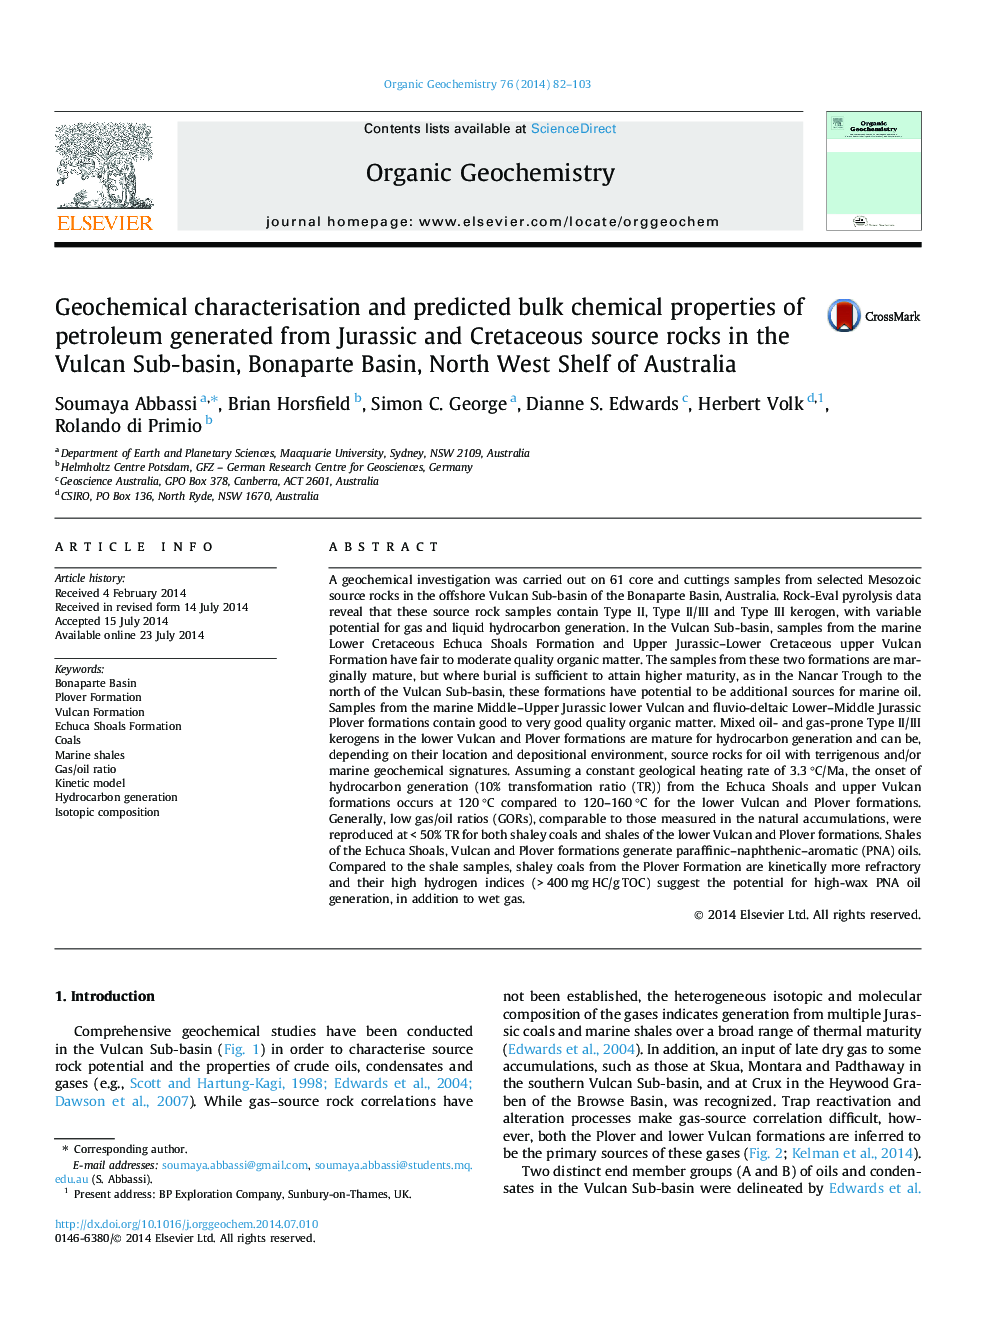 Geochemical characterisation and predicted bulk chemical properties of petroleum generated from Jurassic and Cretaceous source rocks in the Vulcan Sub-basin, Bonaparte Basin, North West Shelf of Australia